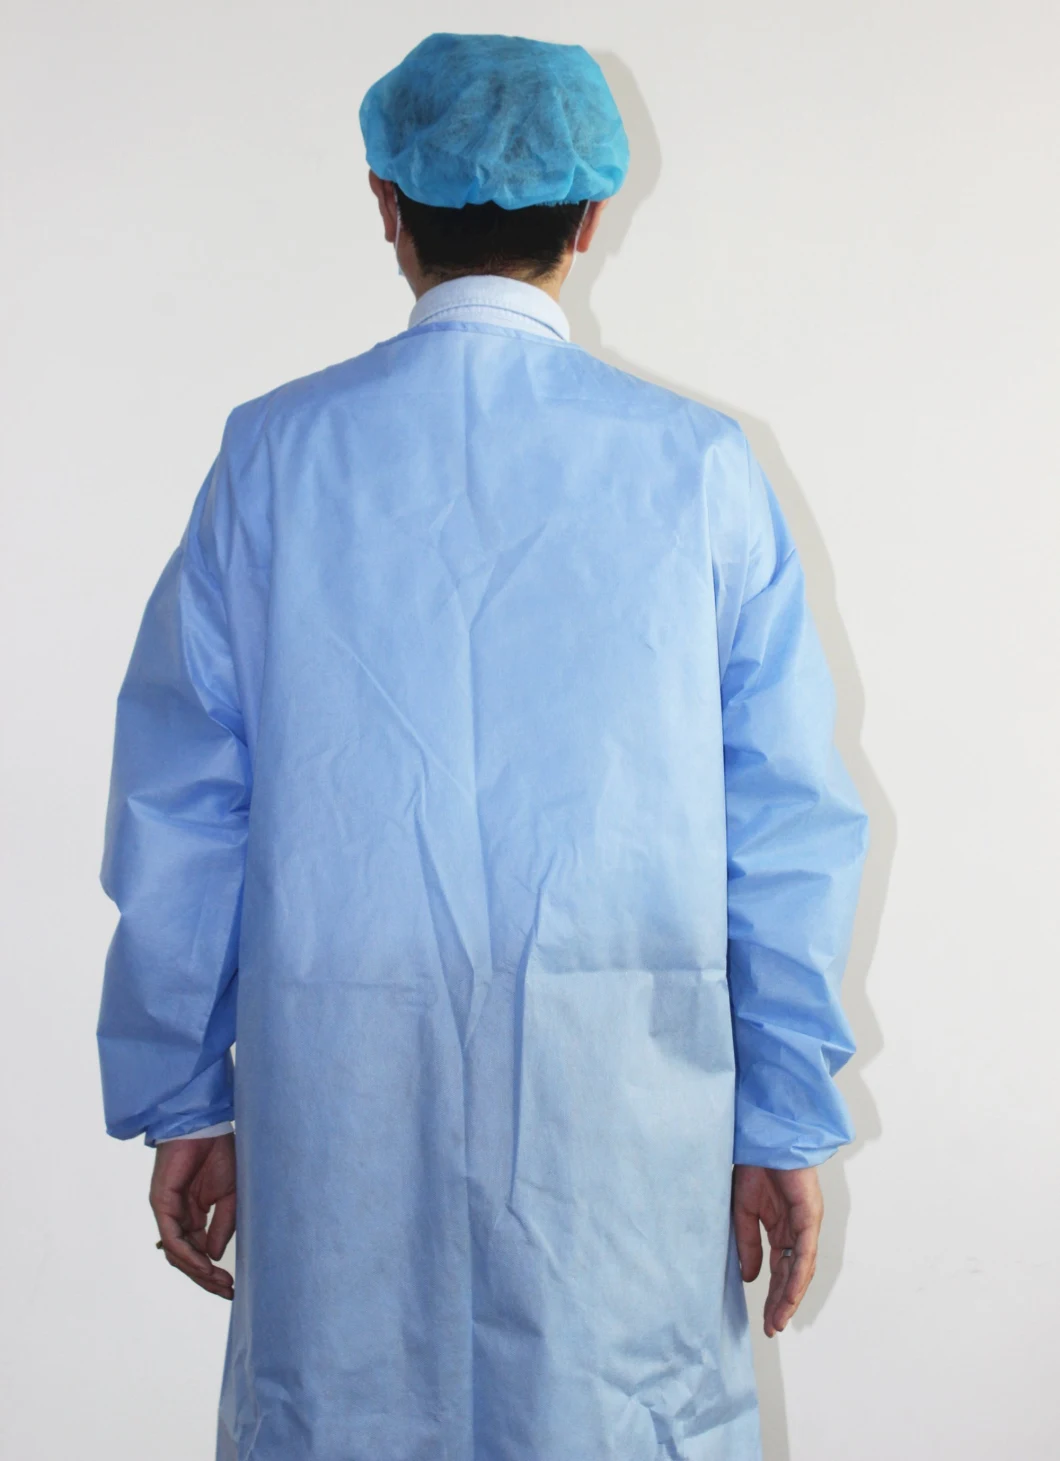 Level 2 Gowns / Isolation Gown / Protective Suit in SMS / PP+PE Disposable Protective Wear